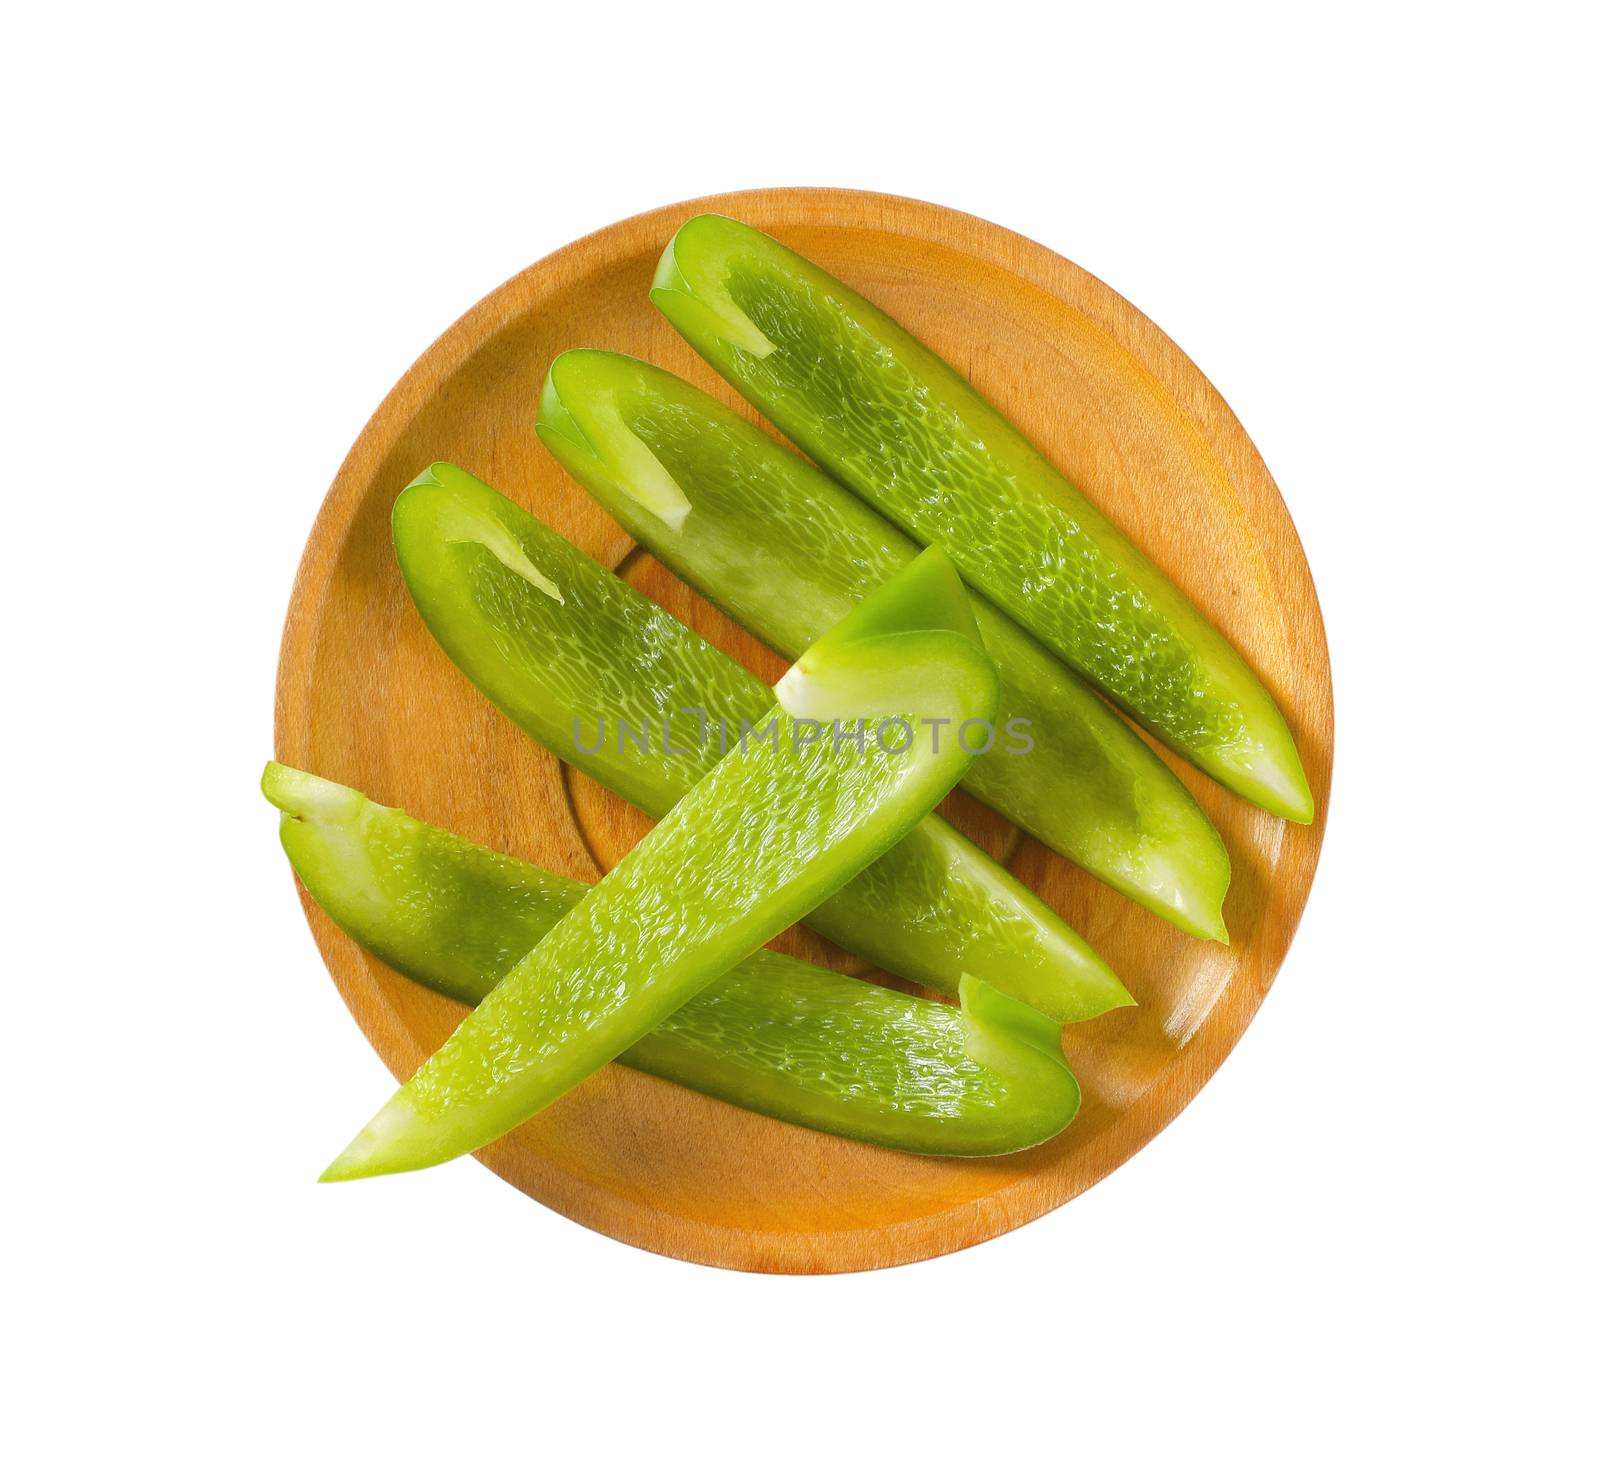 Green bell pepper slices on plate by Digifoodstock